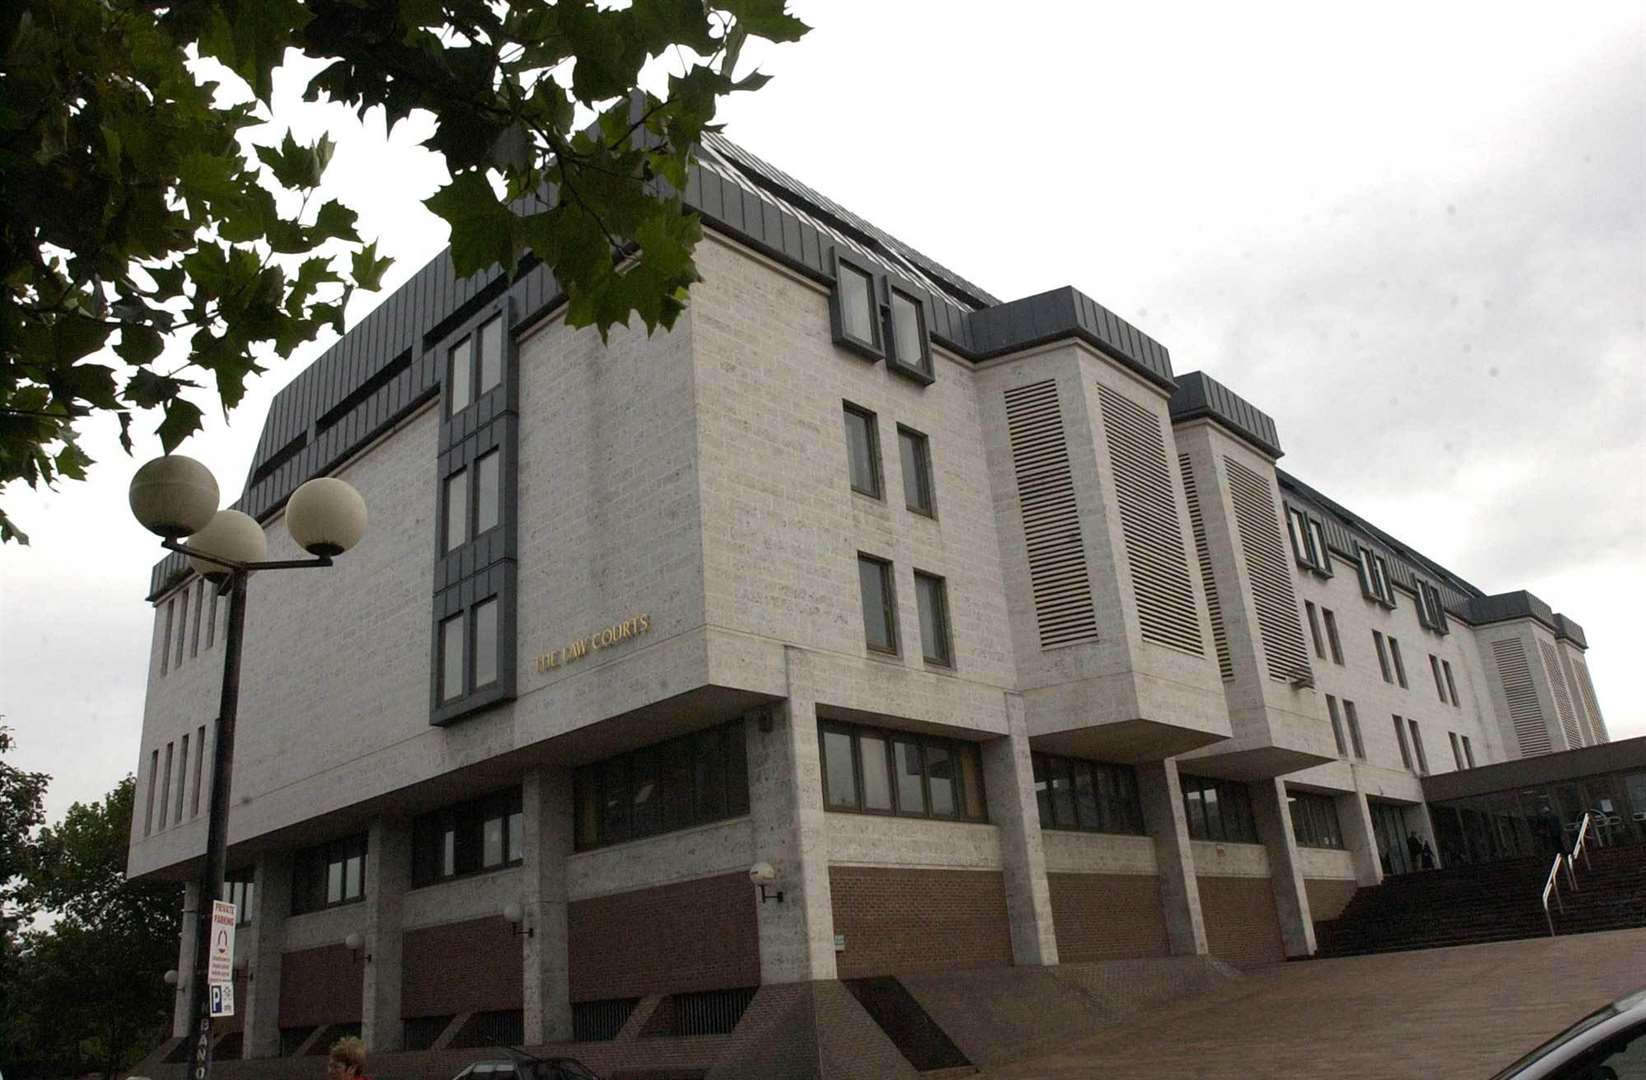 Treeby was jailed at Maidstone Crown Court